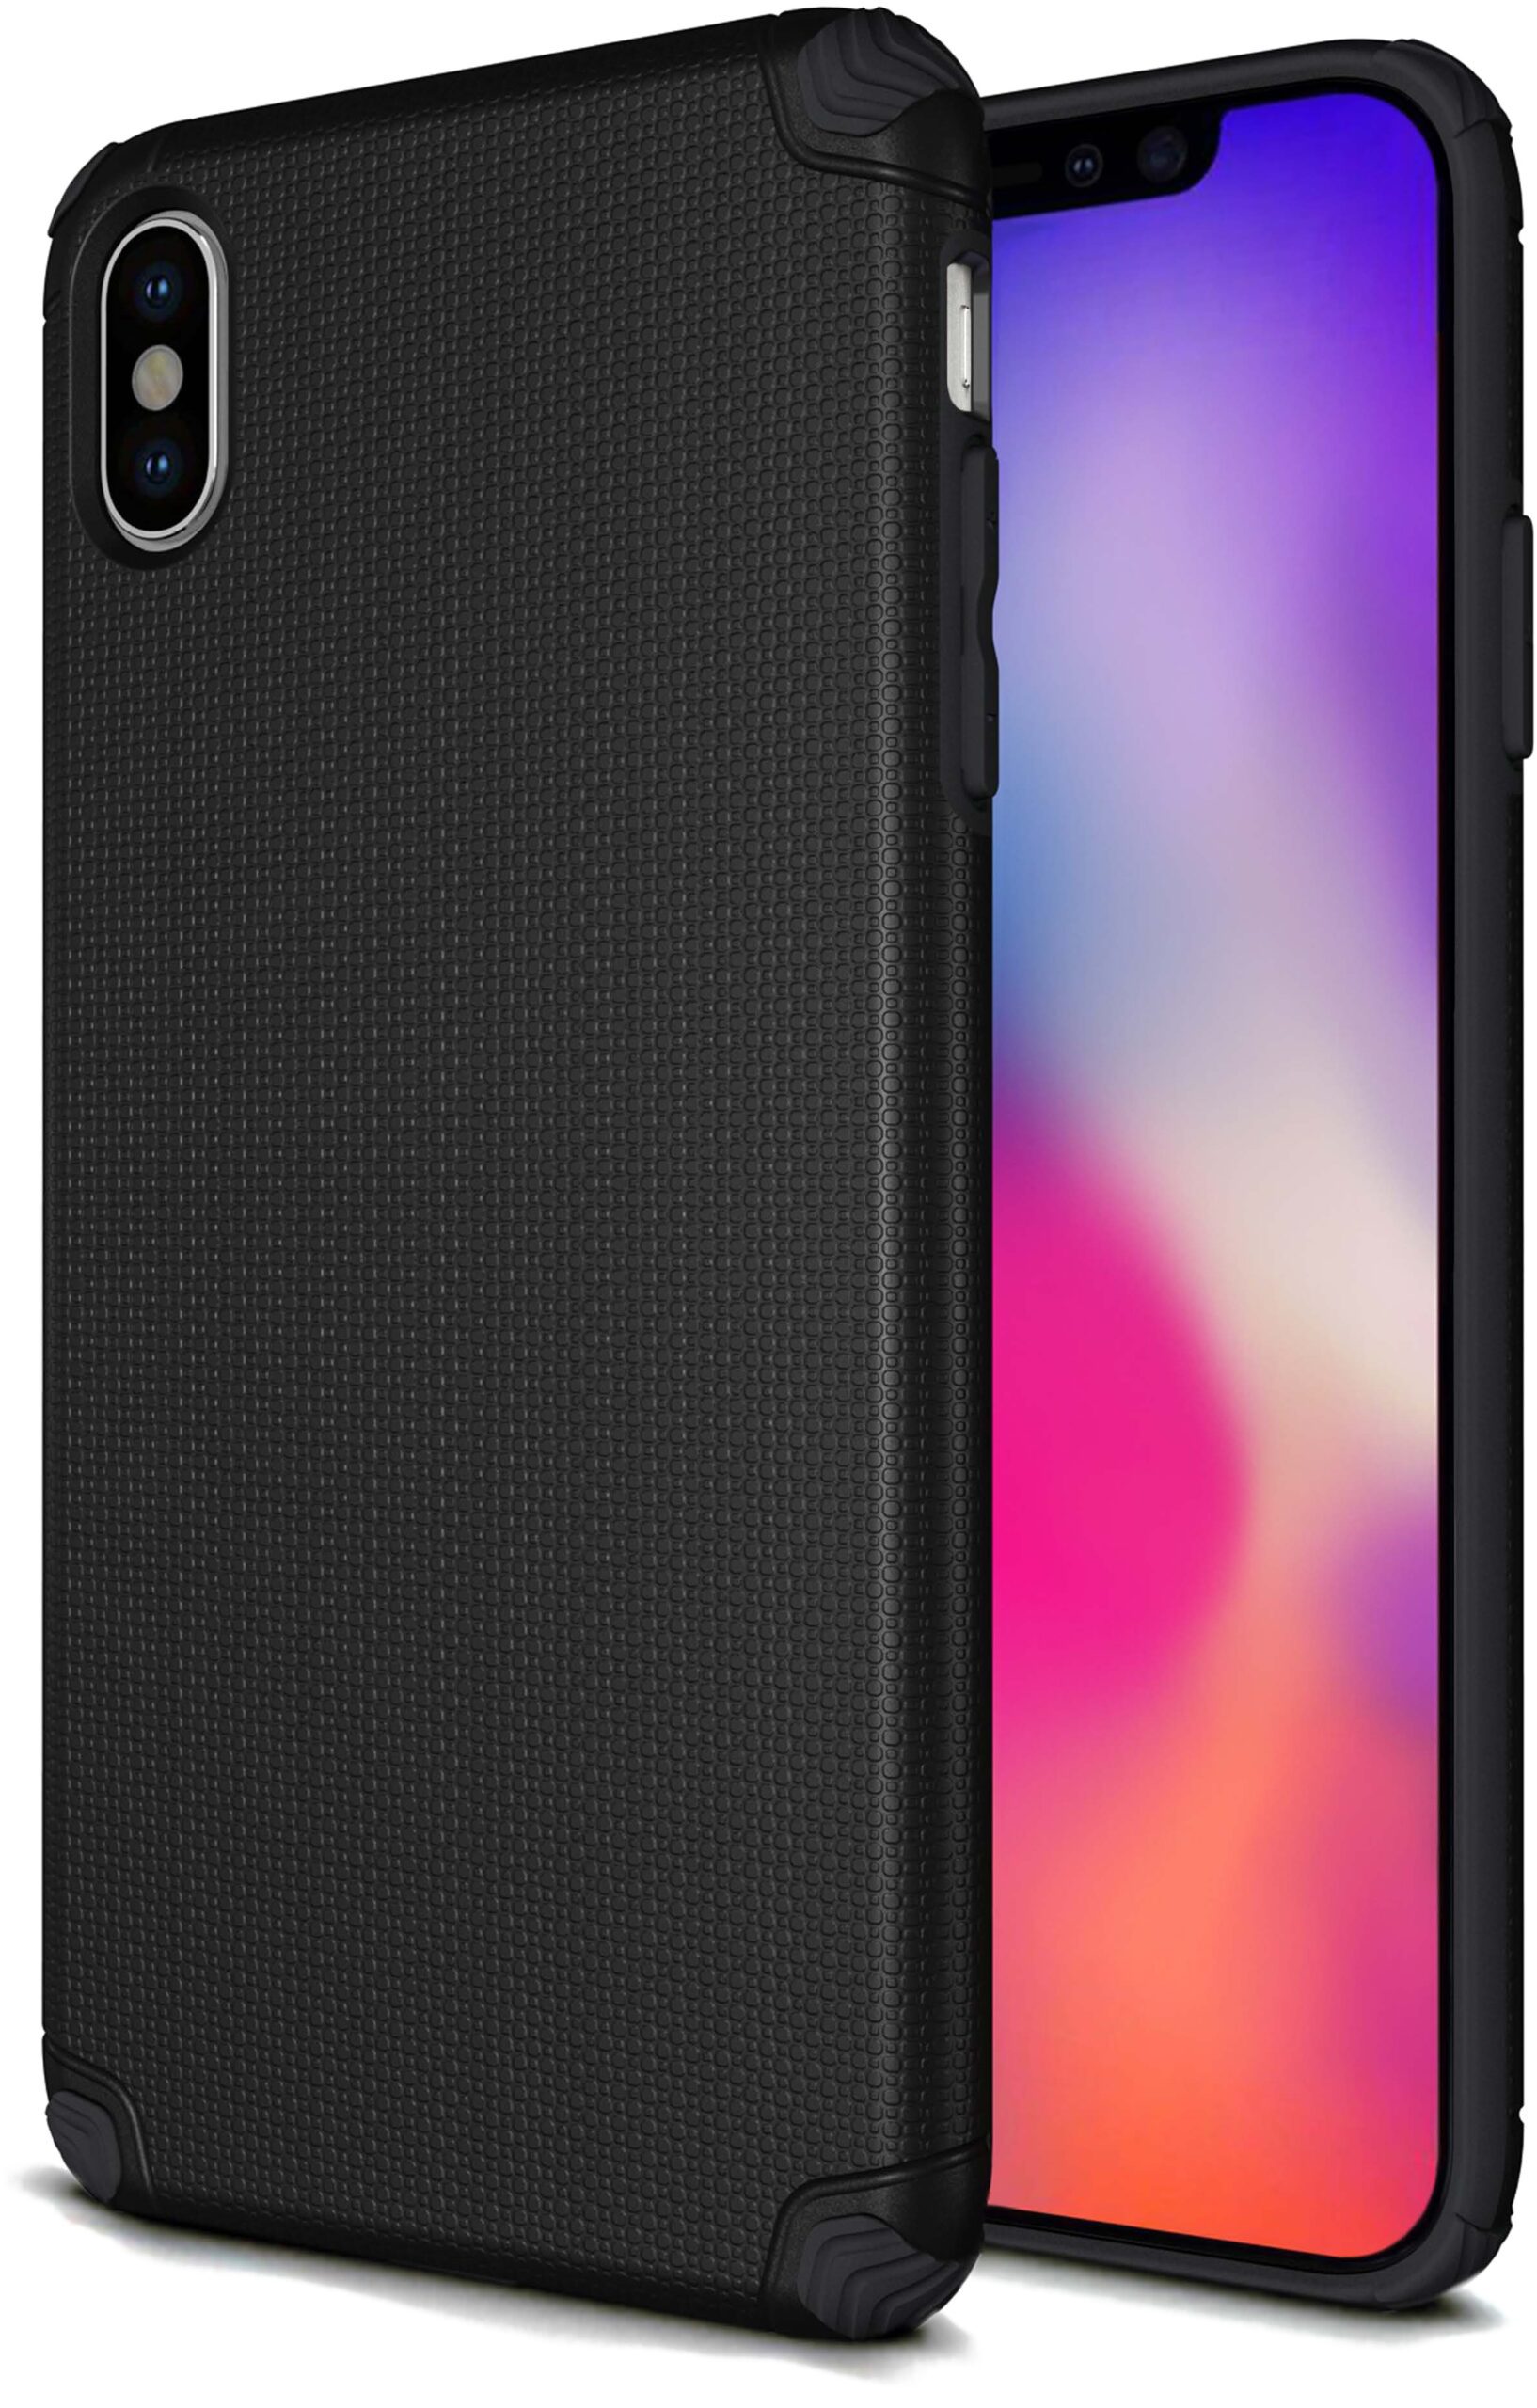 Base ProTech - Rugged Armor Protective Case for iPhone X Max - Black